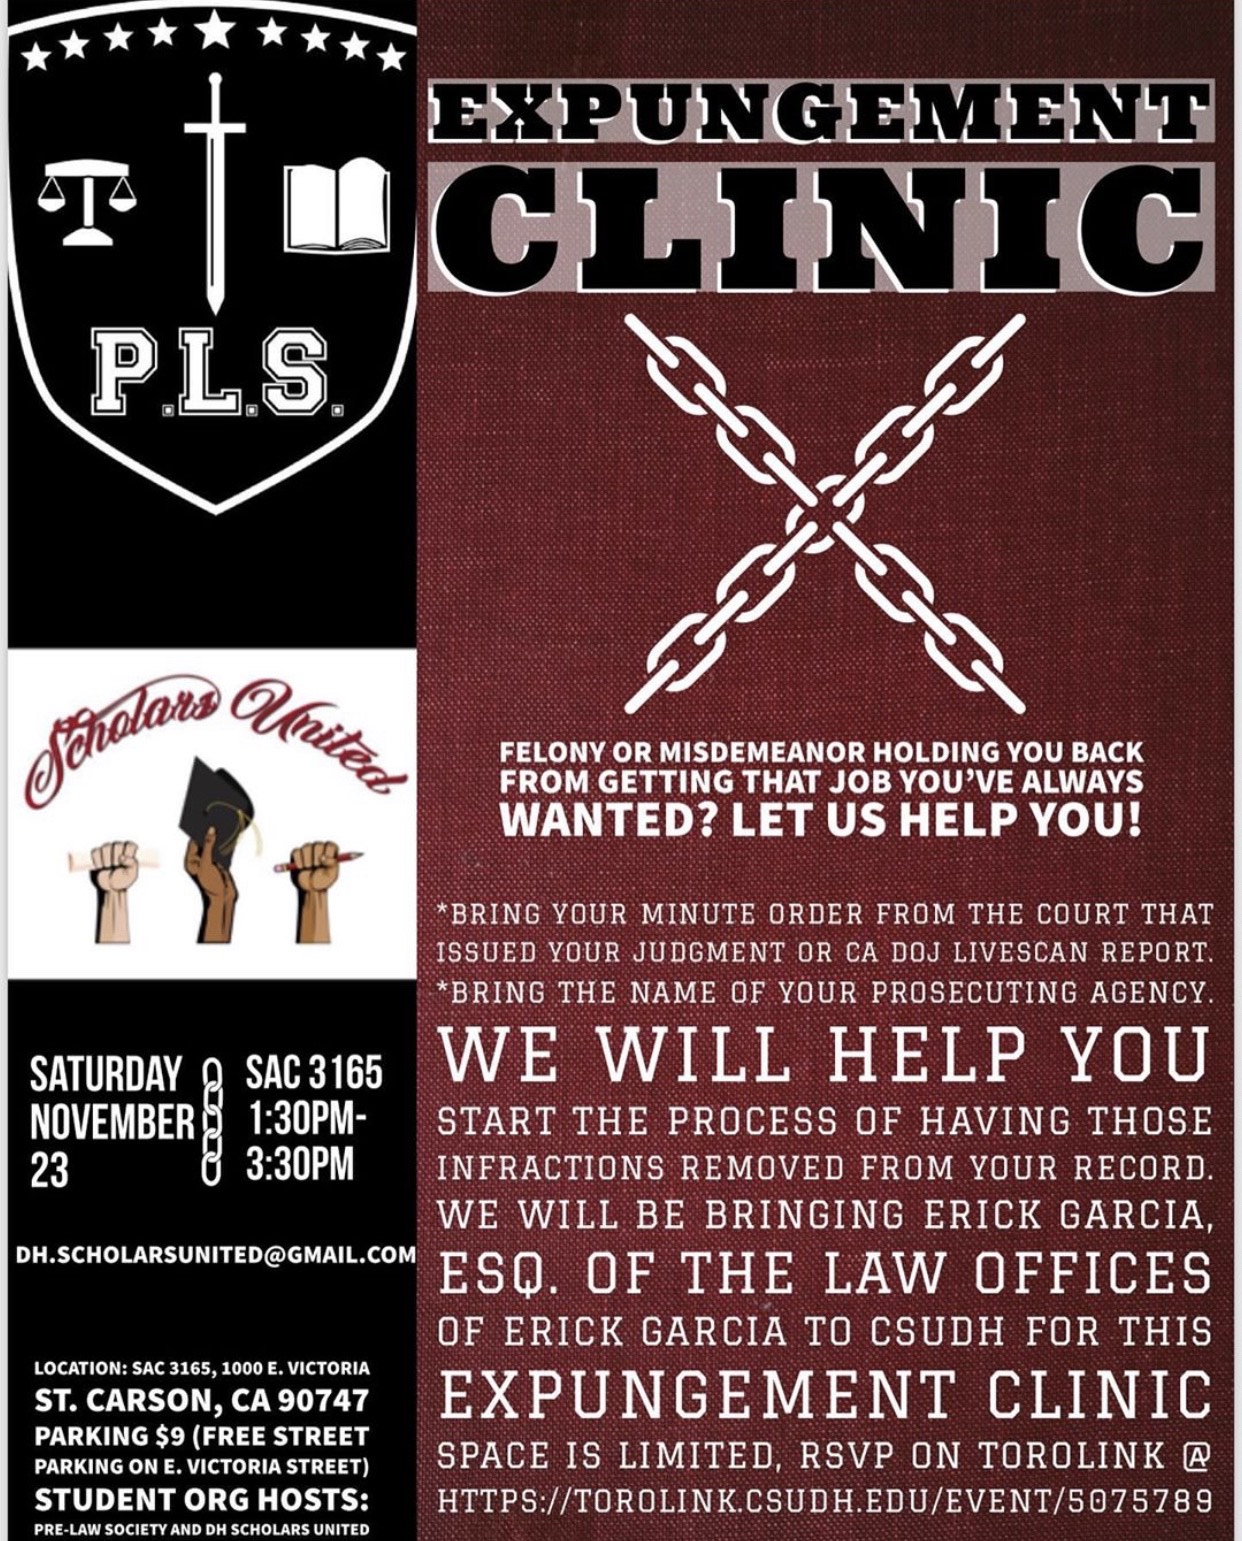 Providing A Second Chance For Those With A Criminal Record: Expungement Clinic Nov. 23